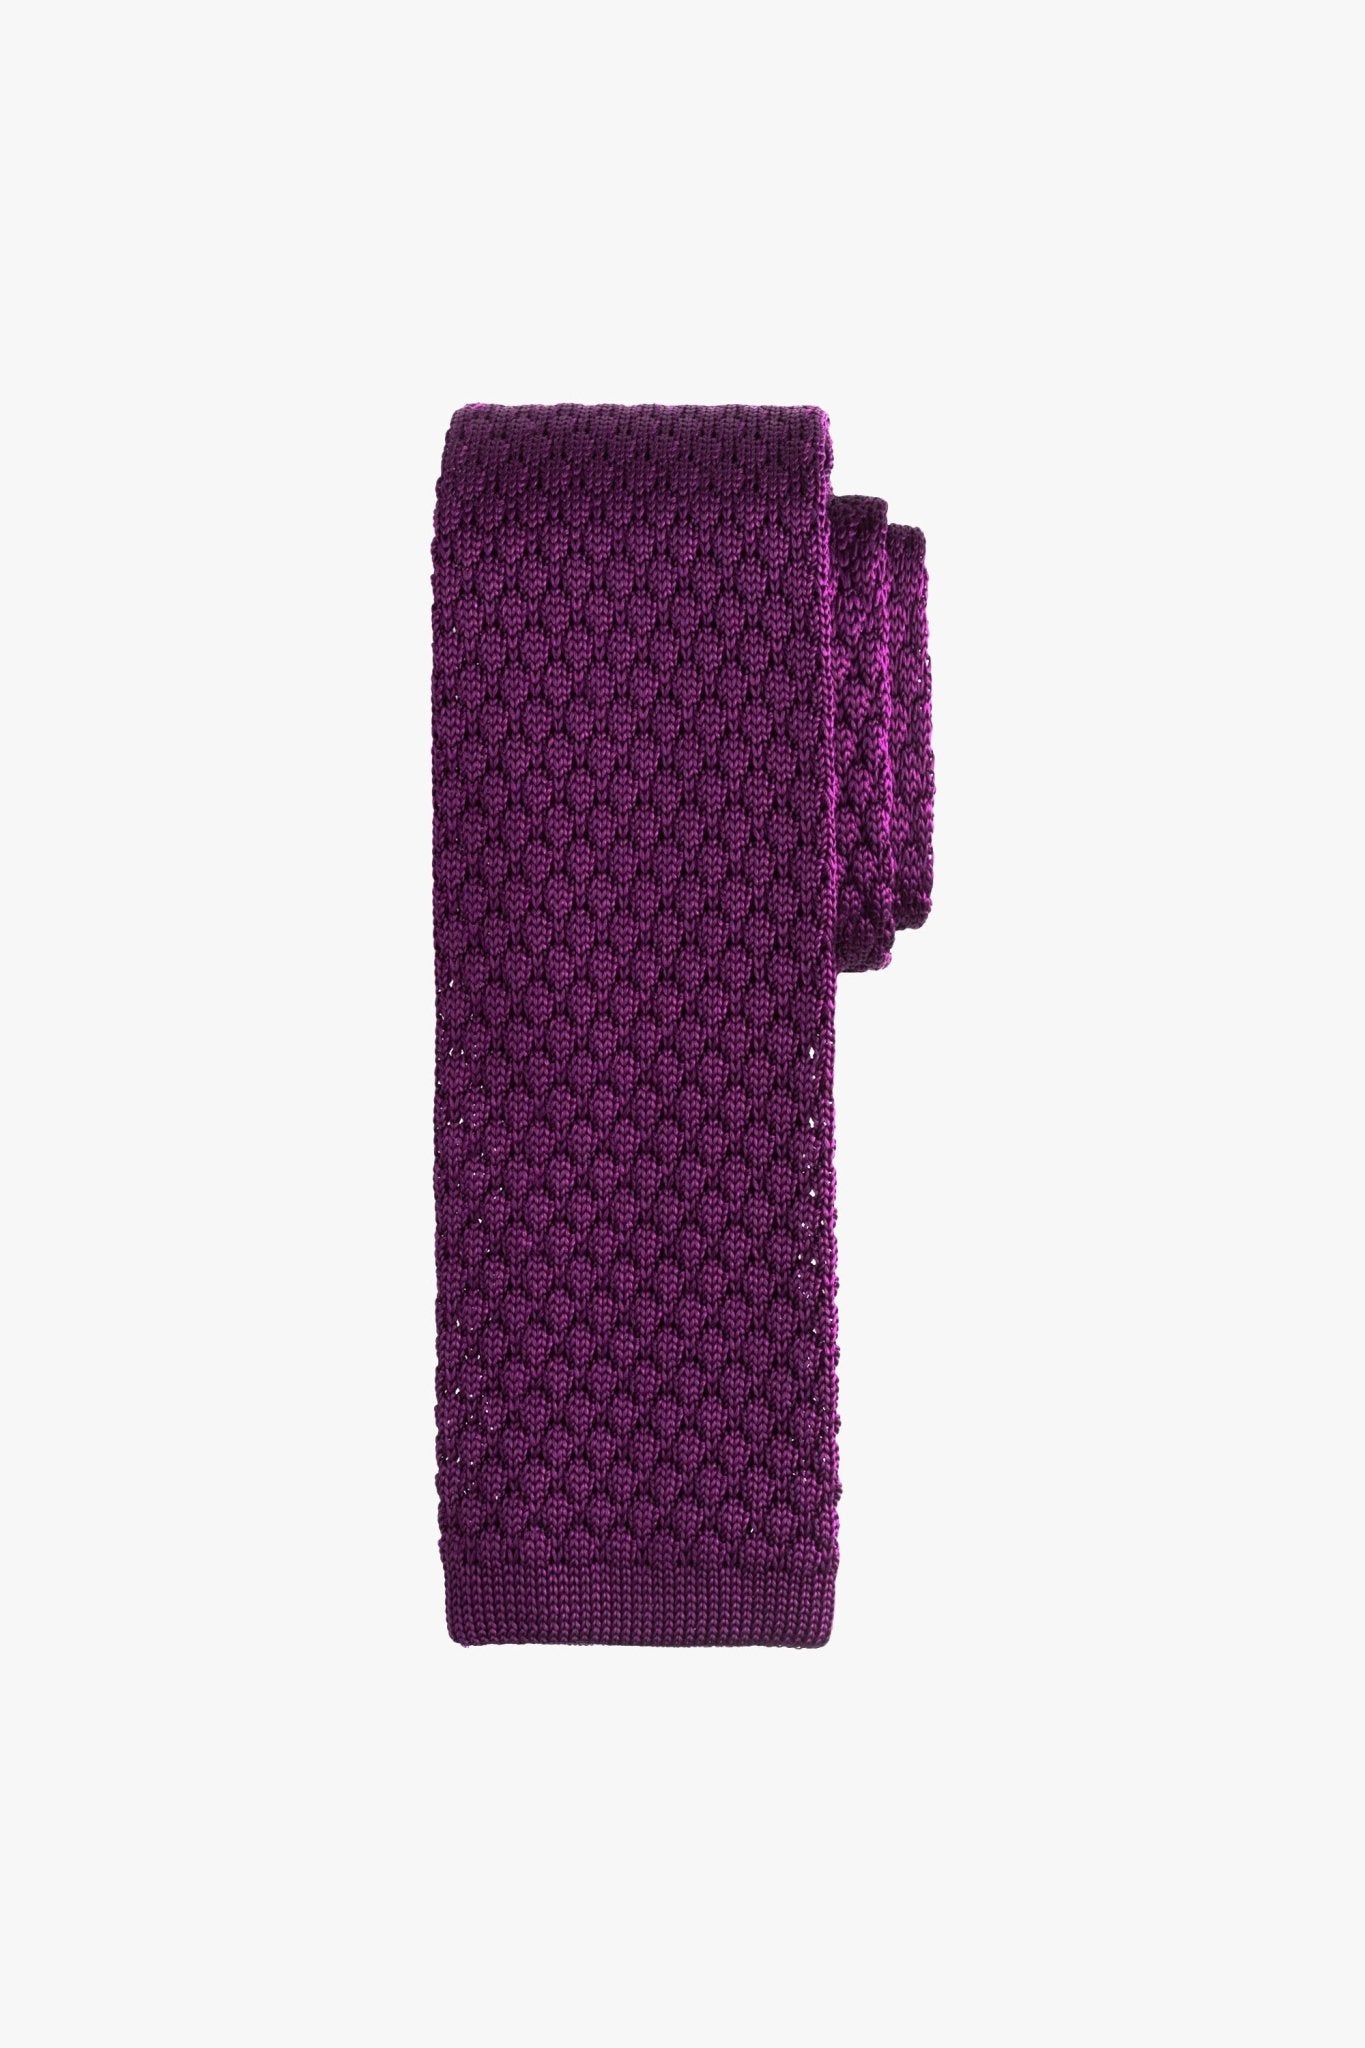 Purple Knitted Tie - My Suited Life